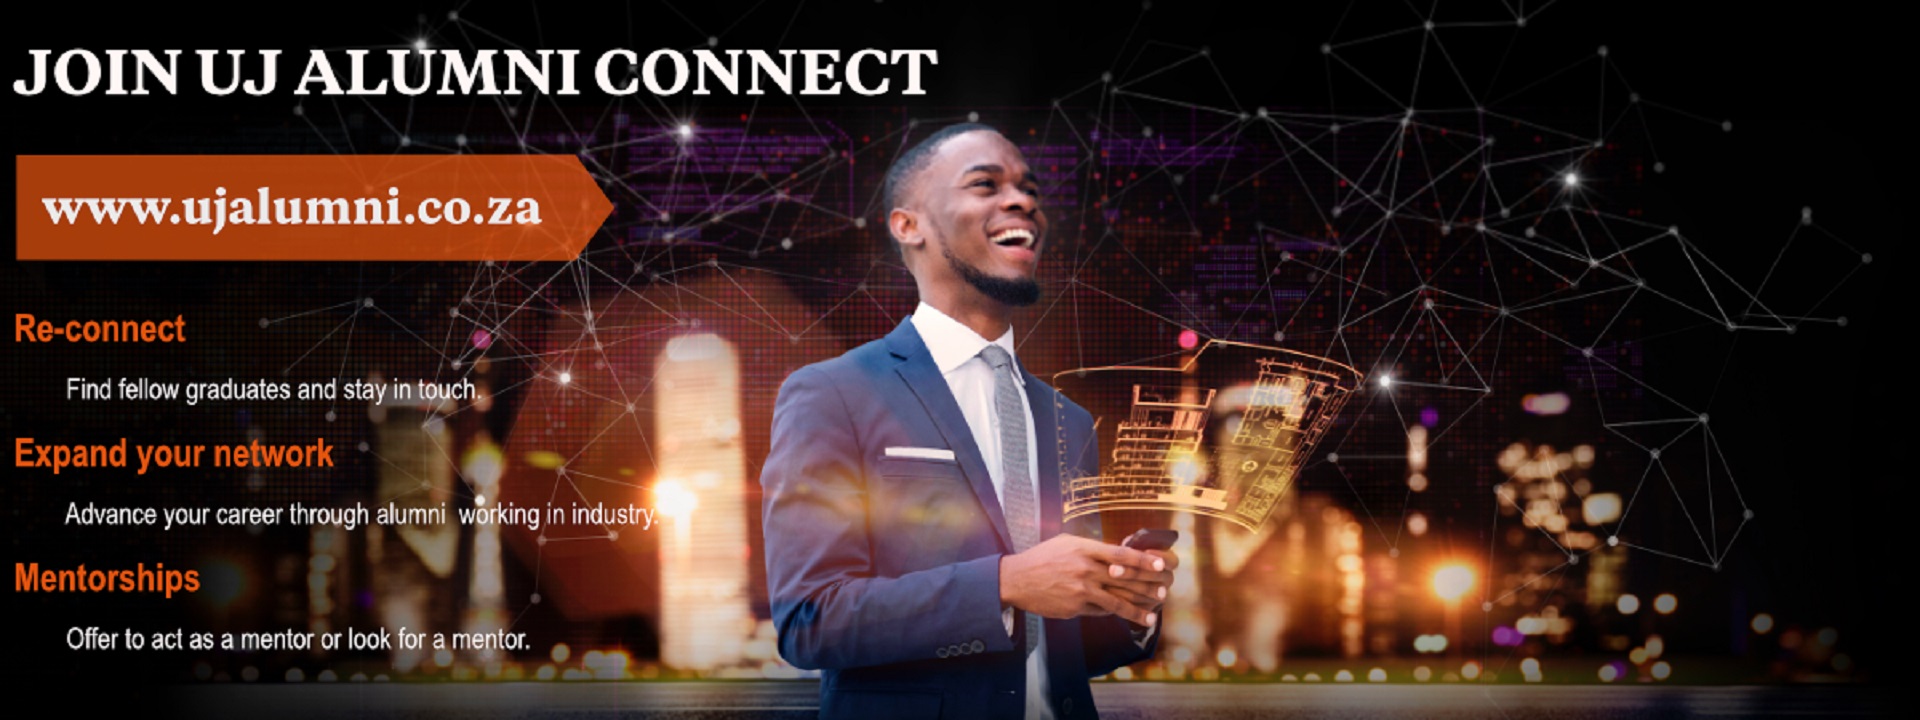 Join Uj Alumni Connect Now